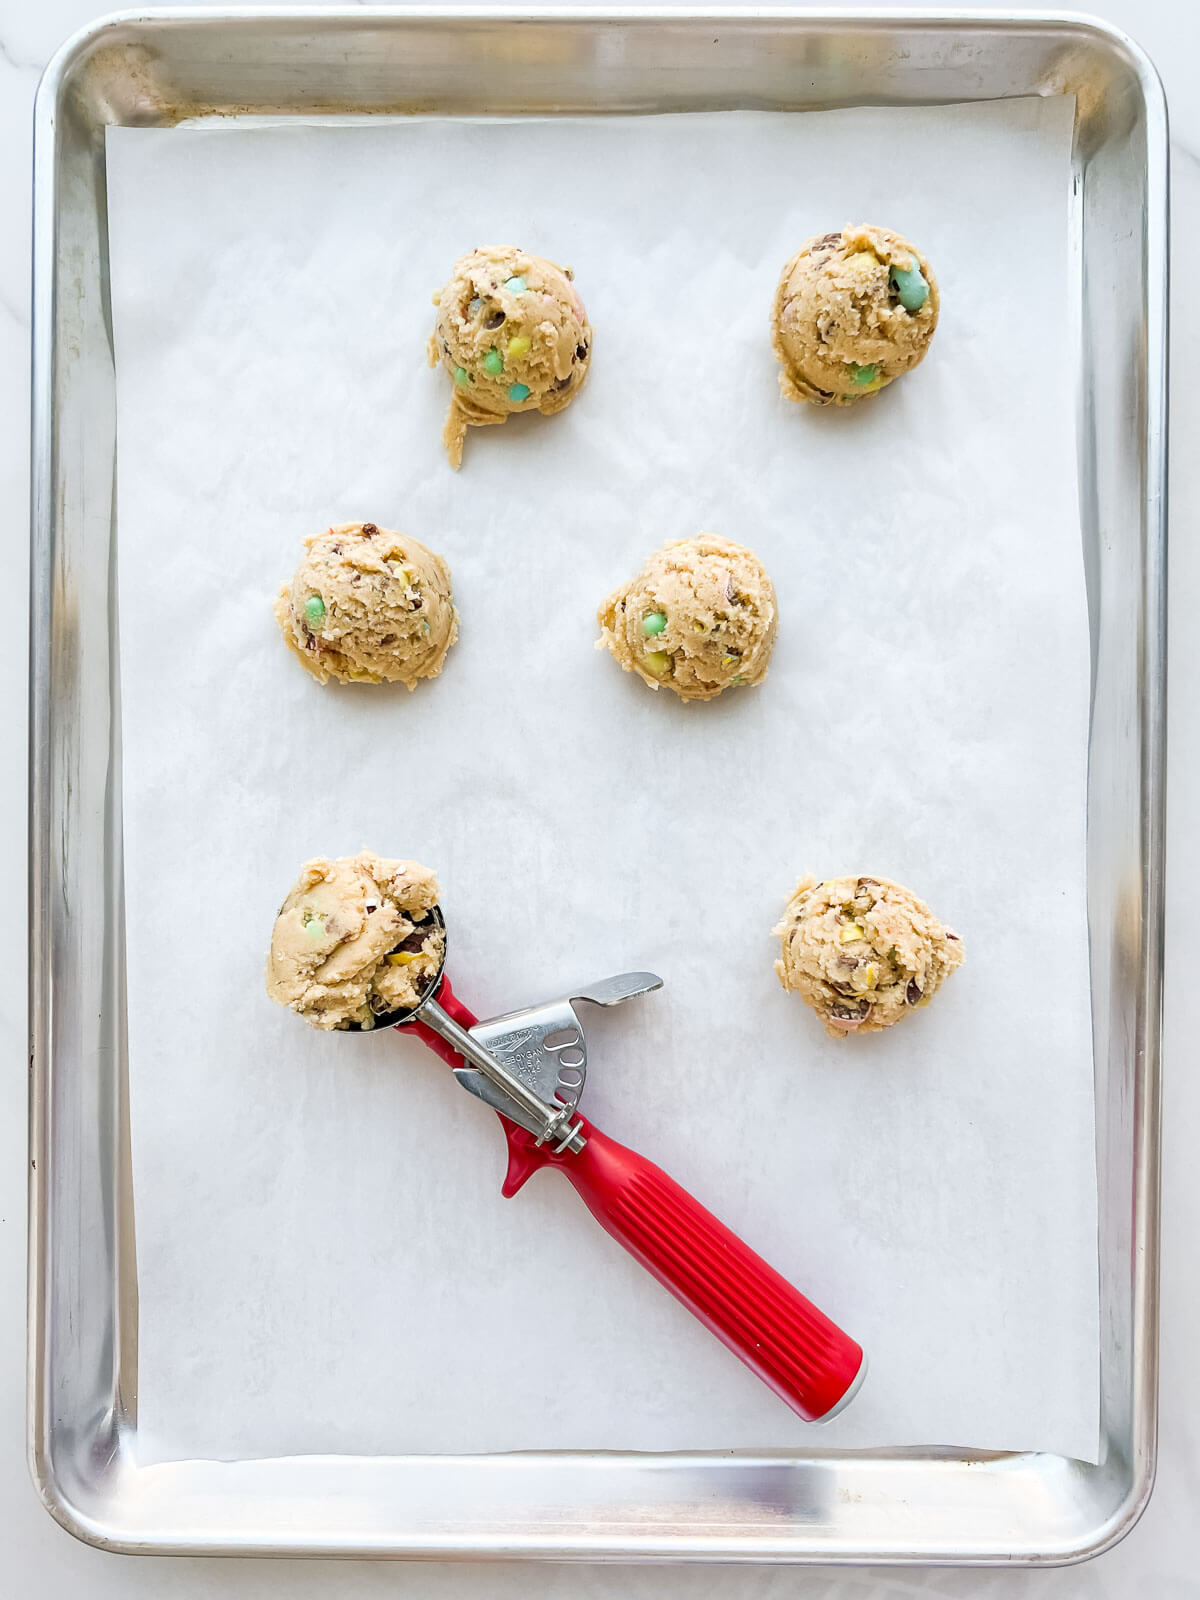 Scooping Easter cookie dough onto a parchment-lined sheet pan with a red-handled cookie scoop.